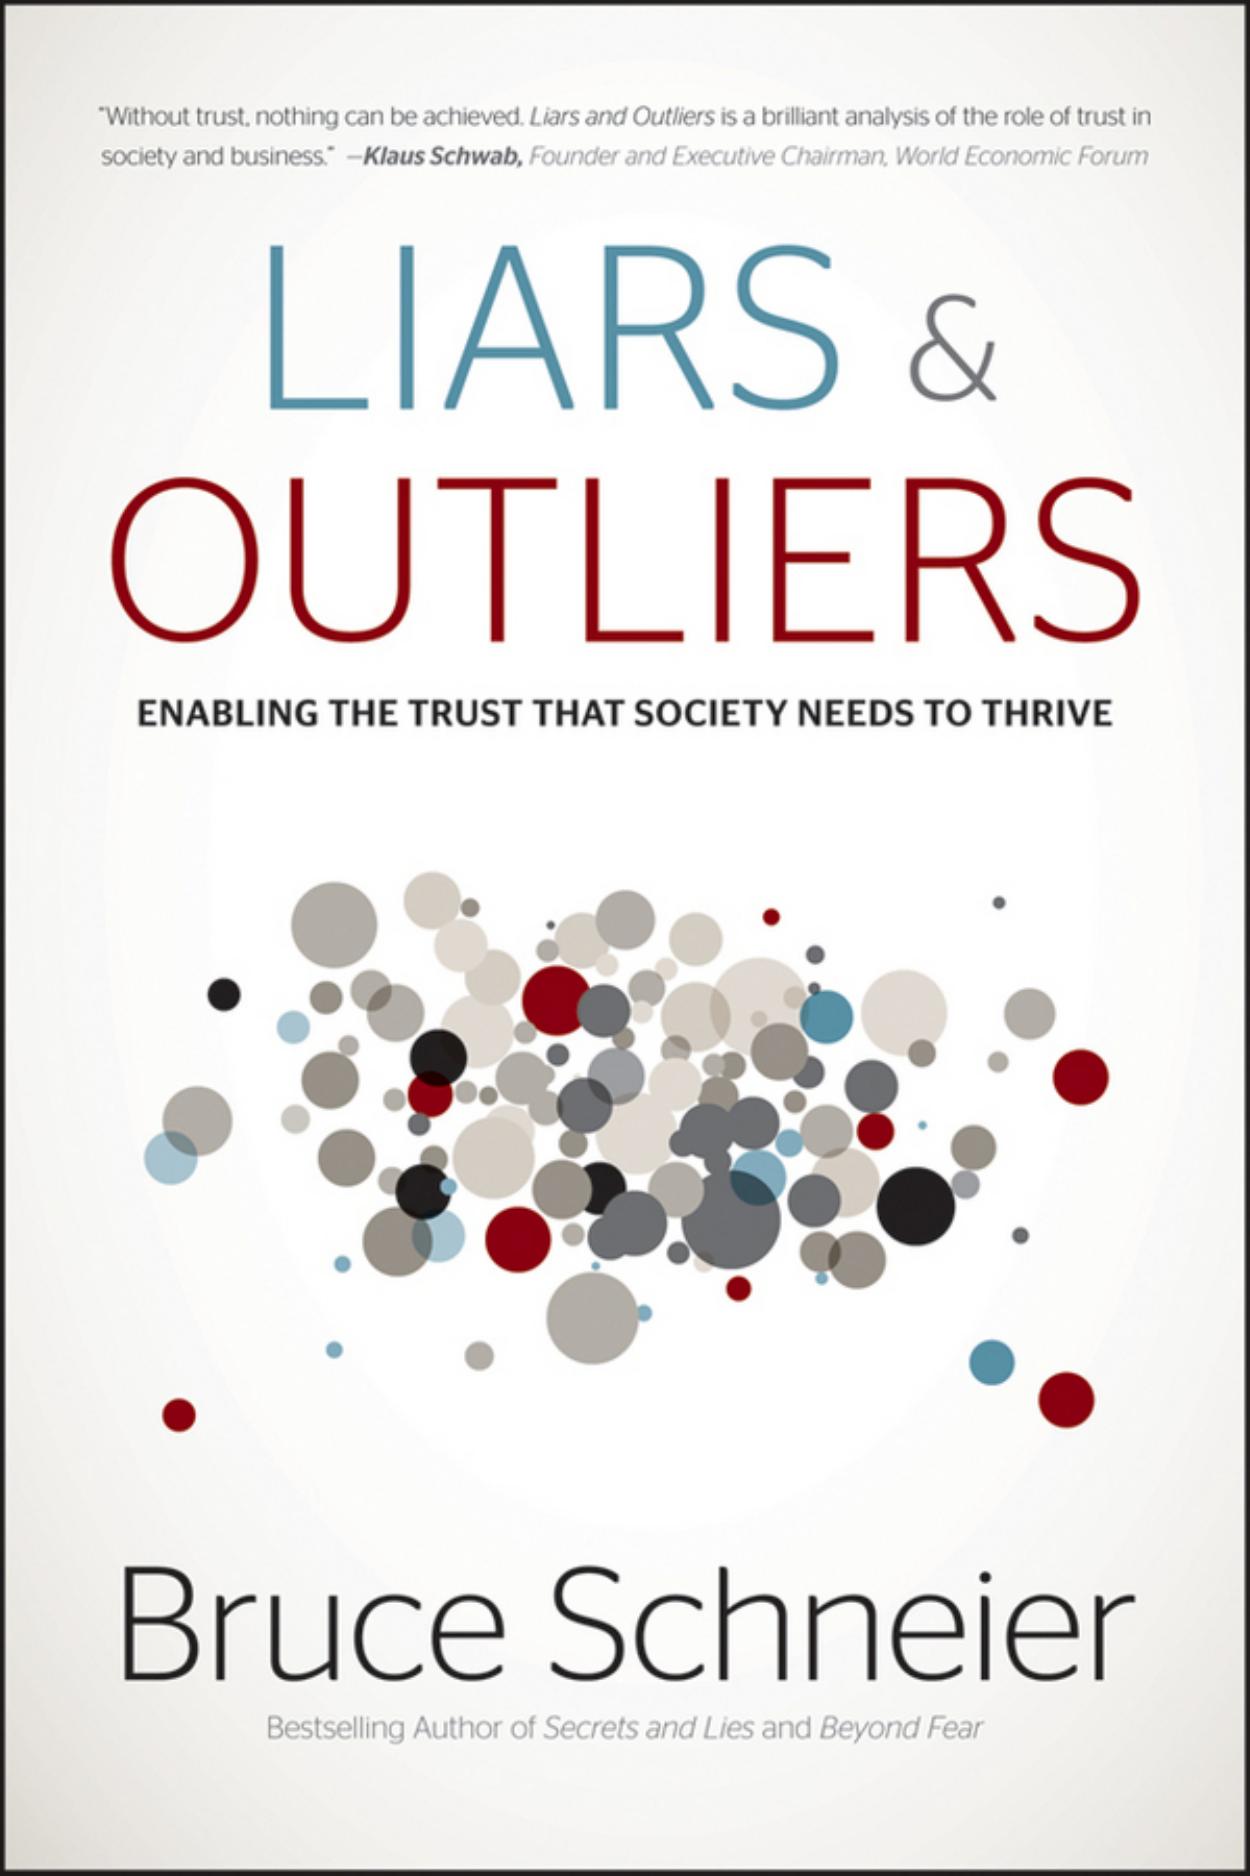 Liars and Outliers by Bruce Schneier